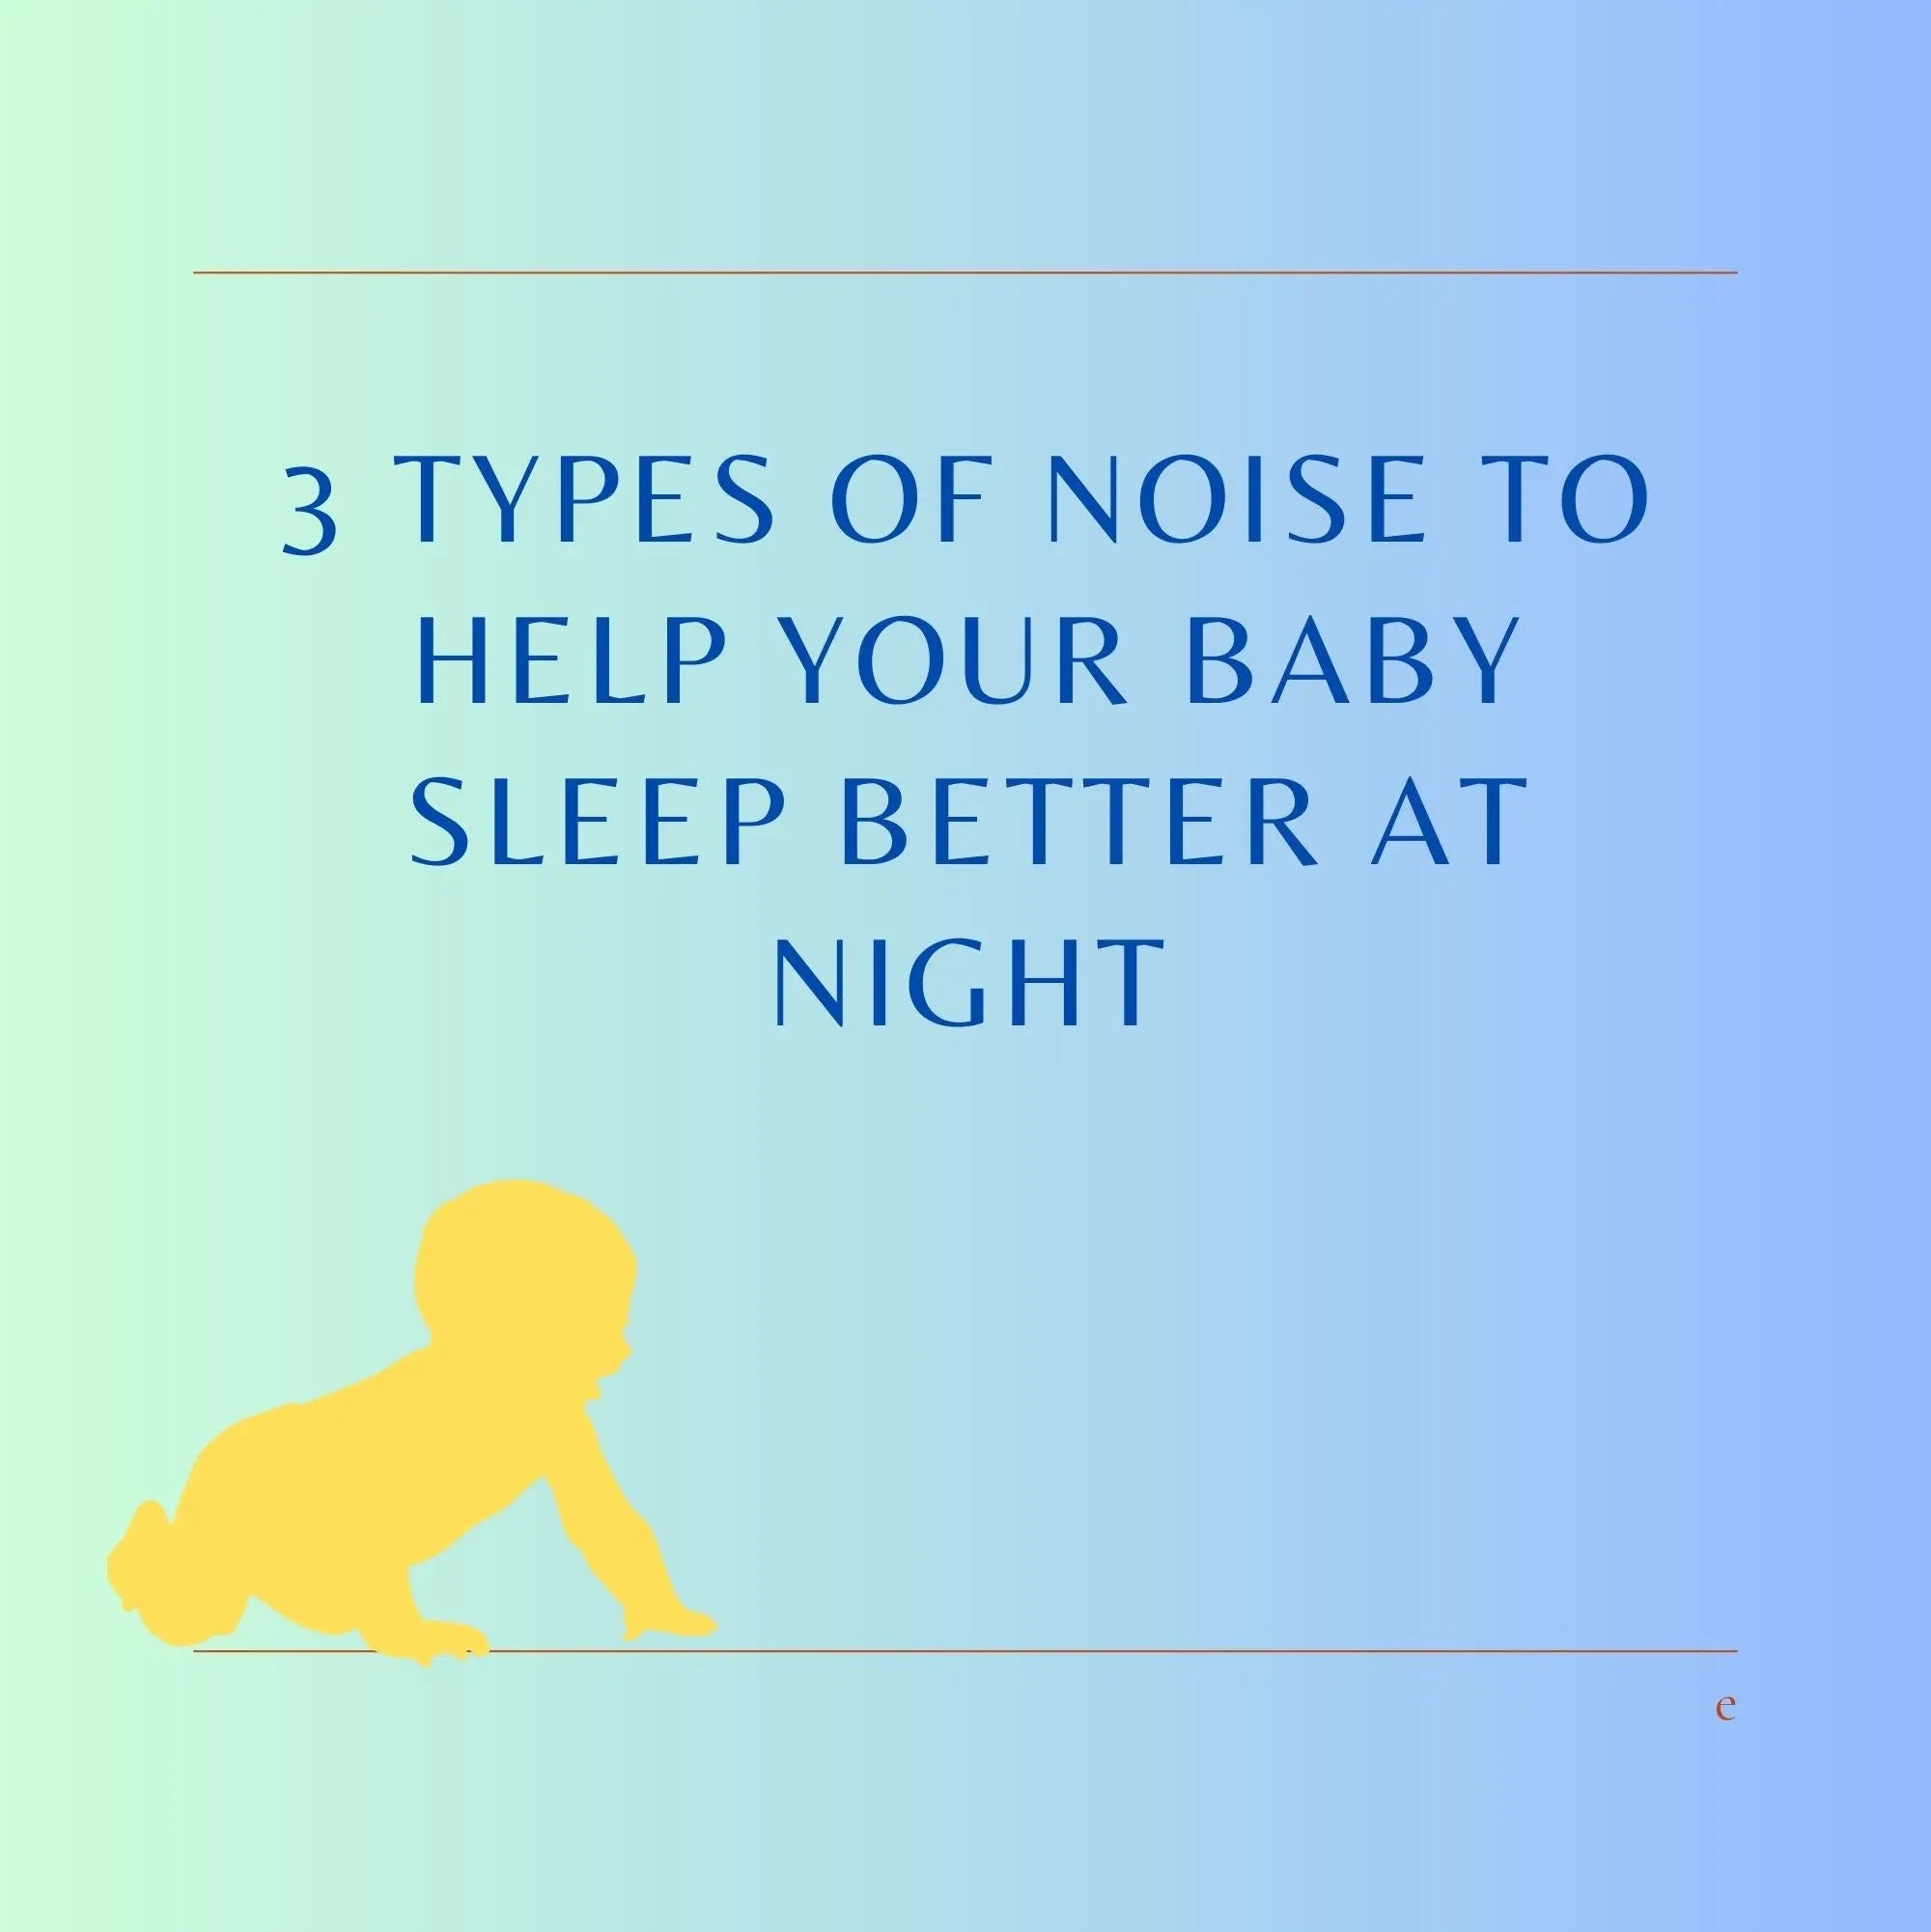 3 Types of Noise to Help Your Baby Sleep Better at Night